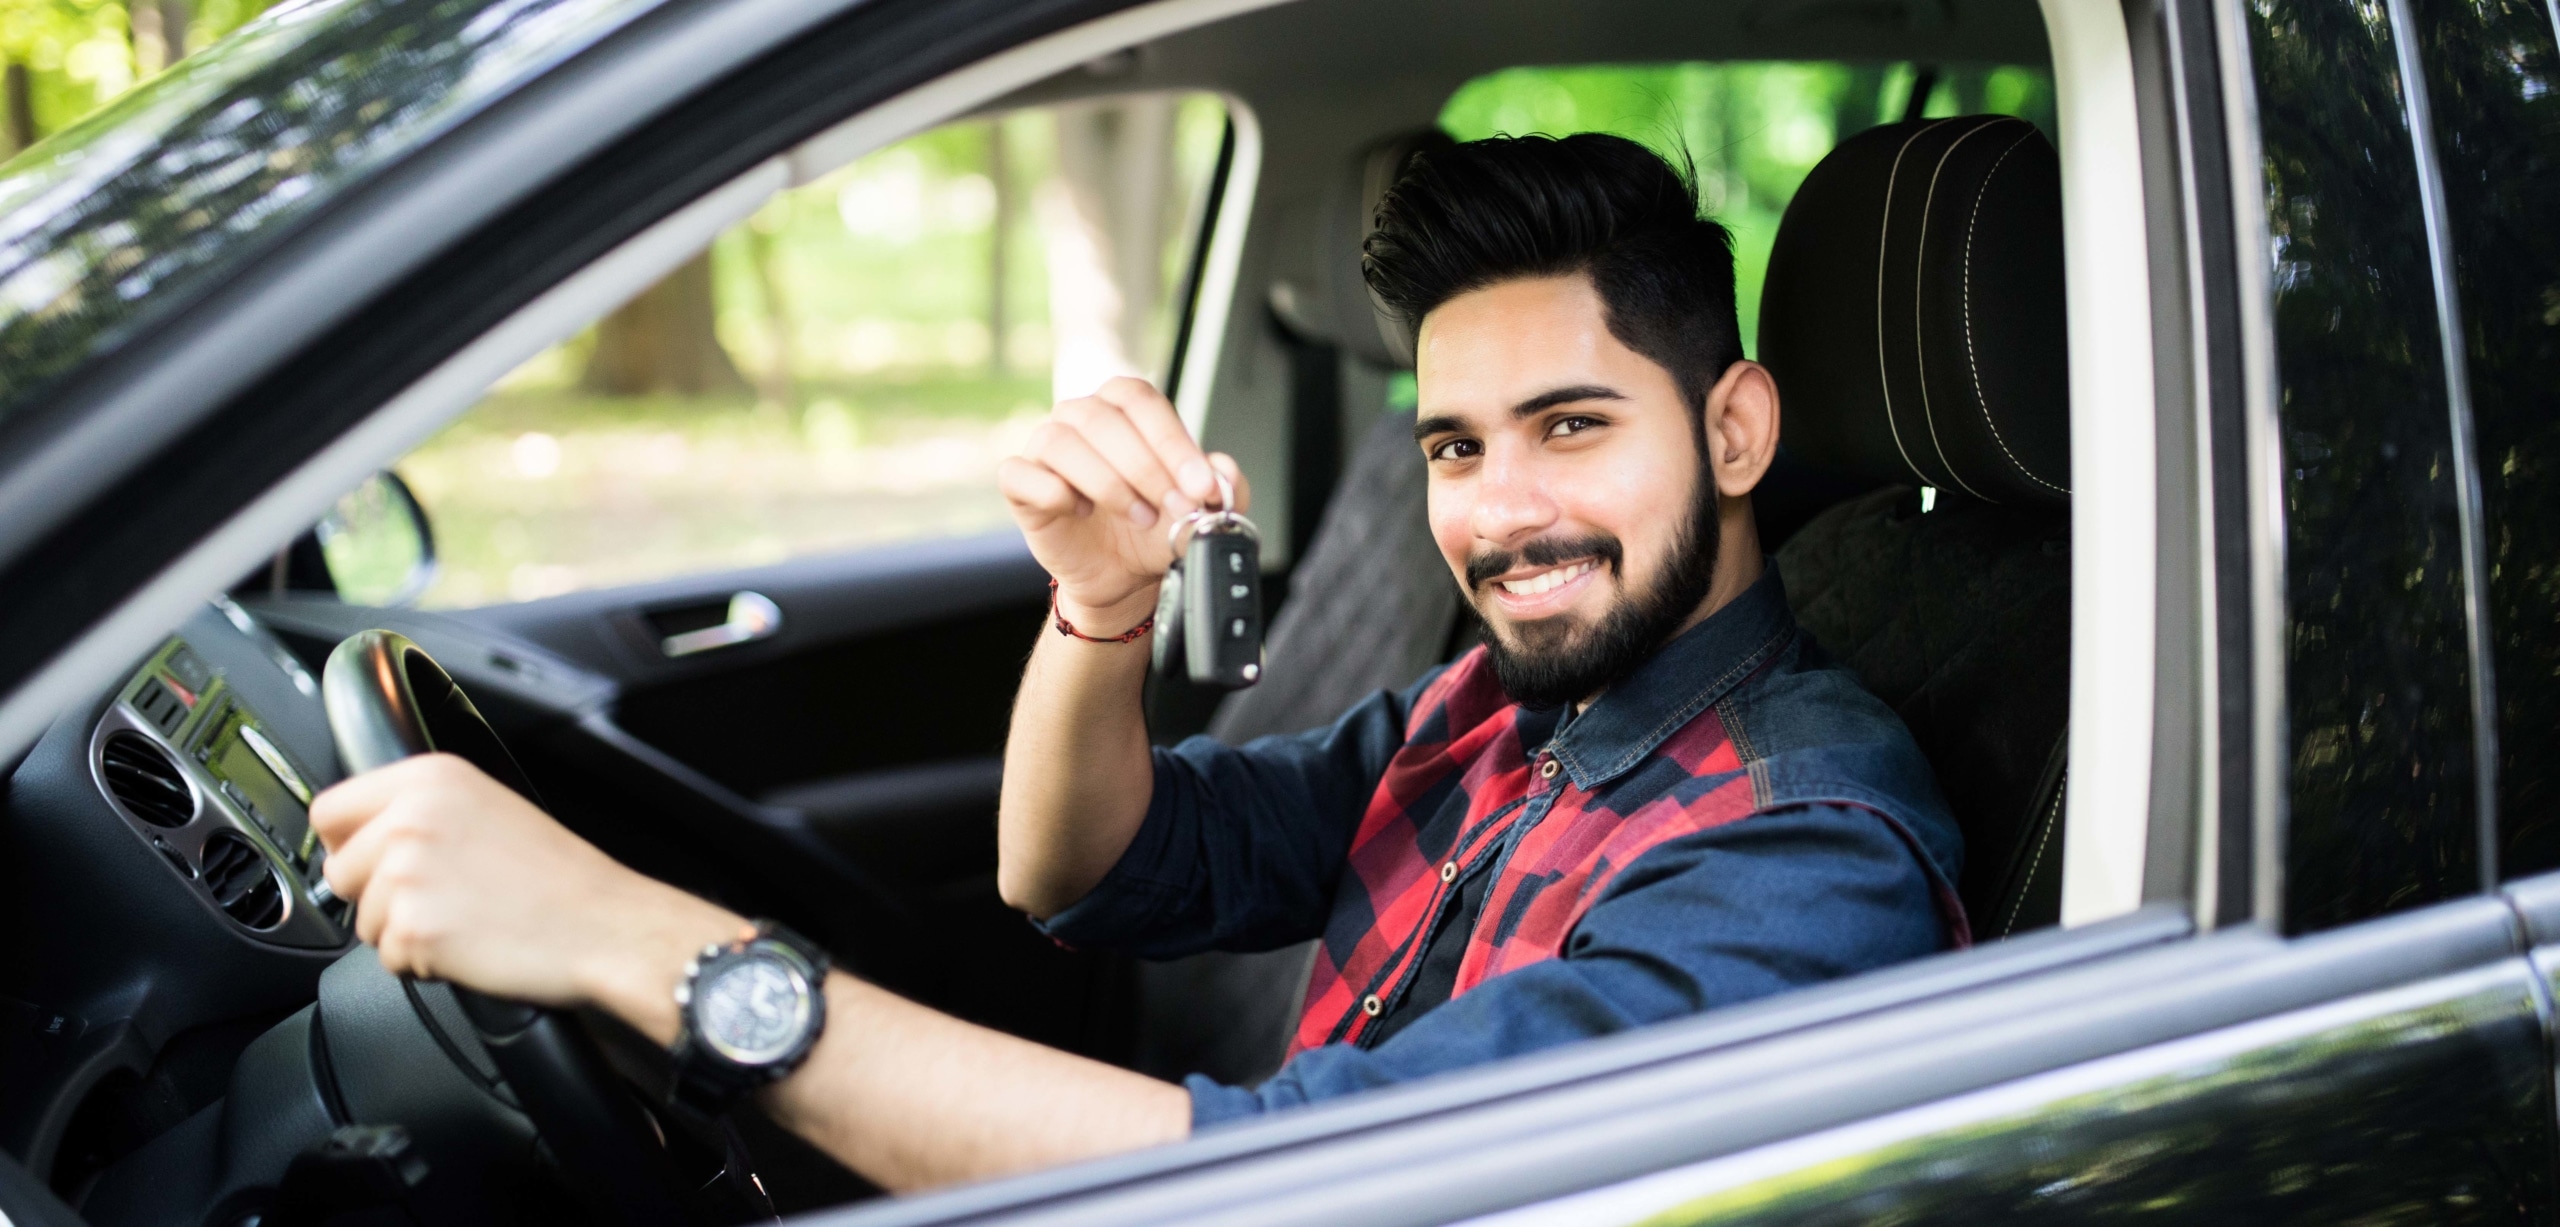 Man seated in a car holding keys and smiling at the camera | Rent-to-Own Cars: Are They a Good Idea?